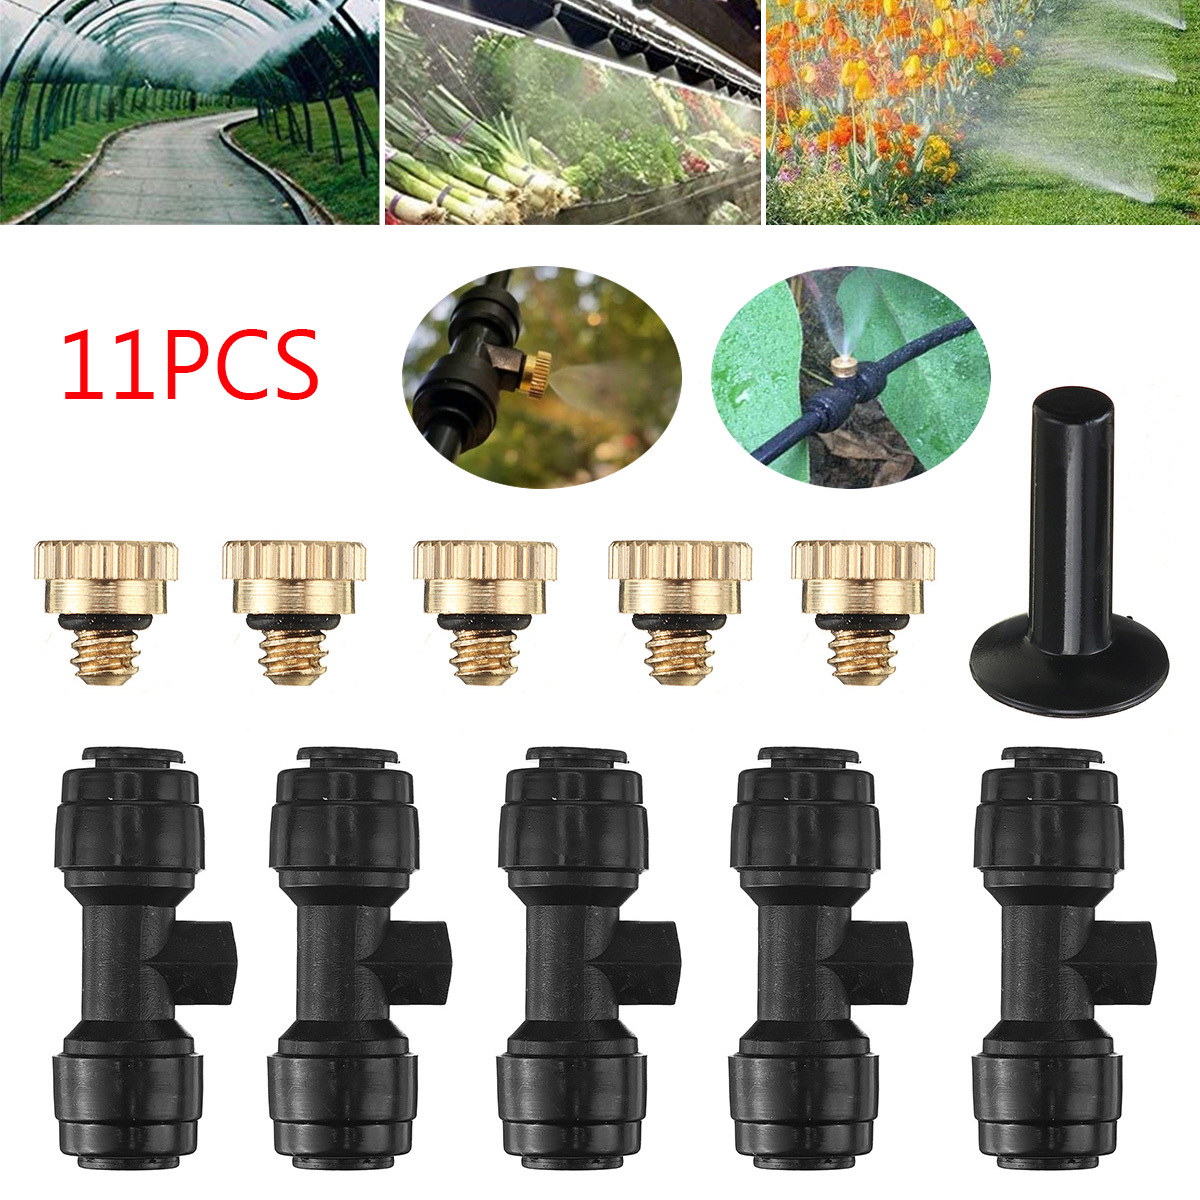 Retractable-Coil-Garden-Hose-Pipe-Expandable-Reel-Spray-System-Tap-Connector-30m-1695084